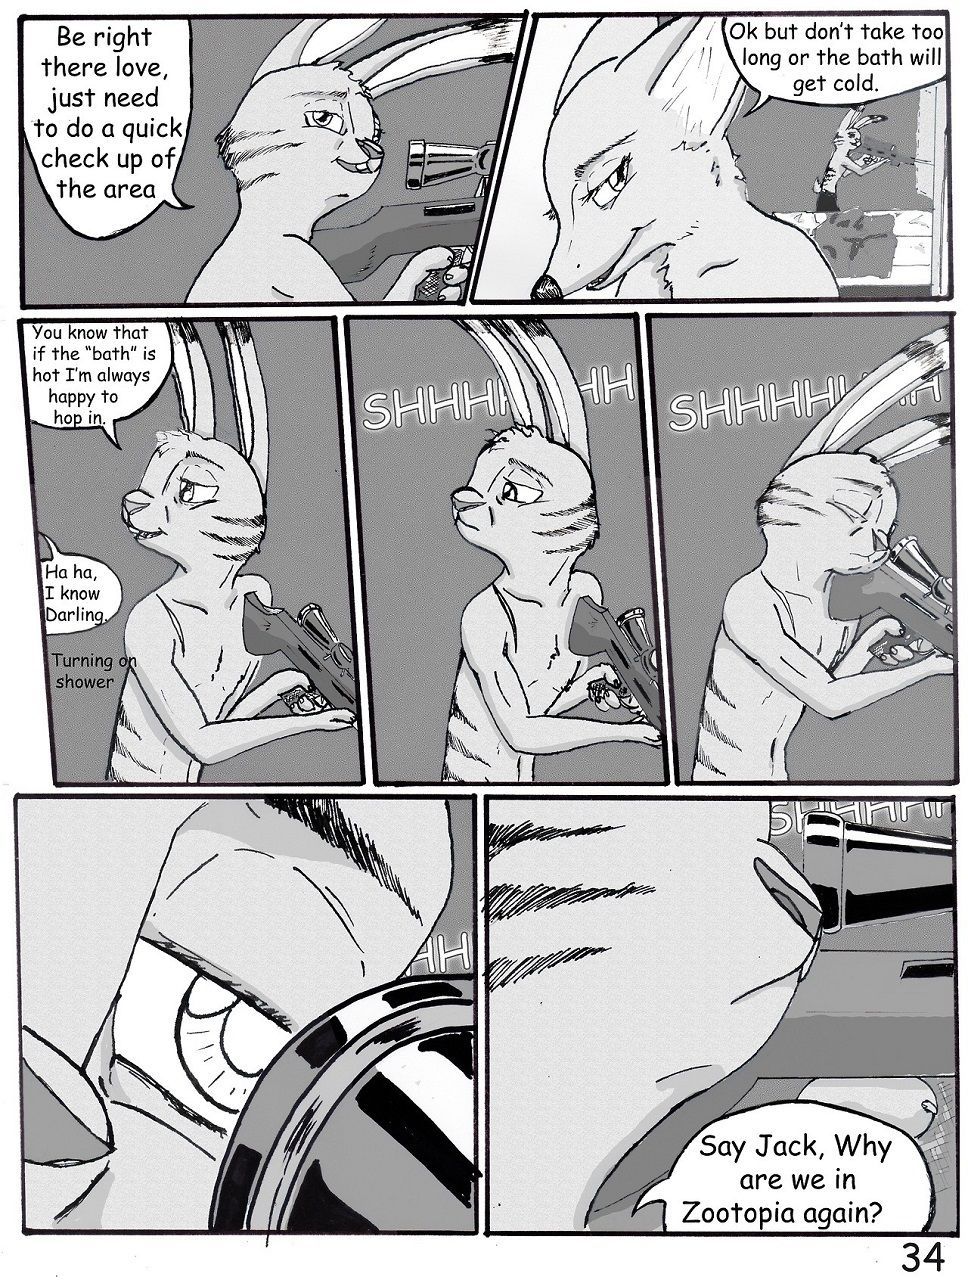 [TheGorySaint] Not Again (Zootopia) Ongoing 34